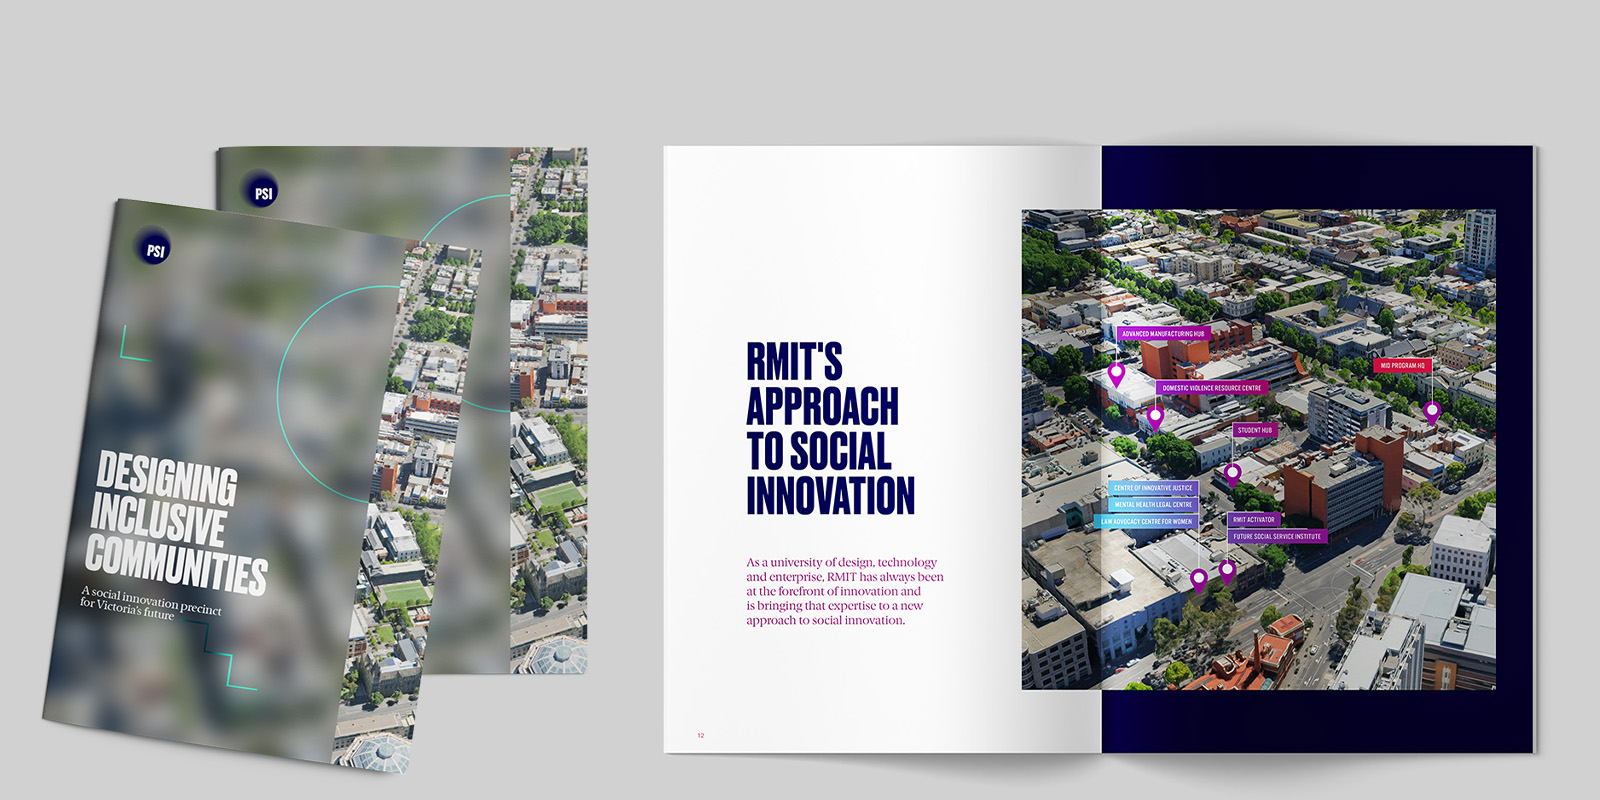 Brochure cover with the title "Designing Inclusive Communities" and an inside spread with a headline on the left and image on the right.